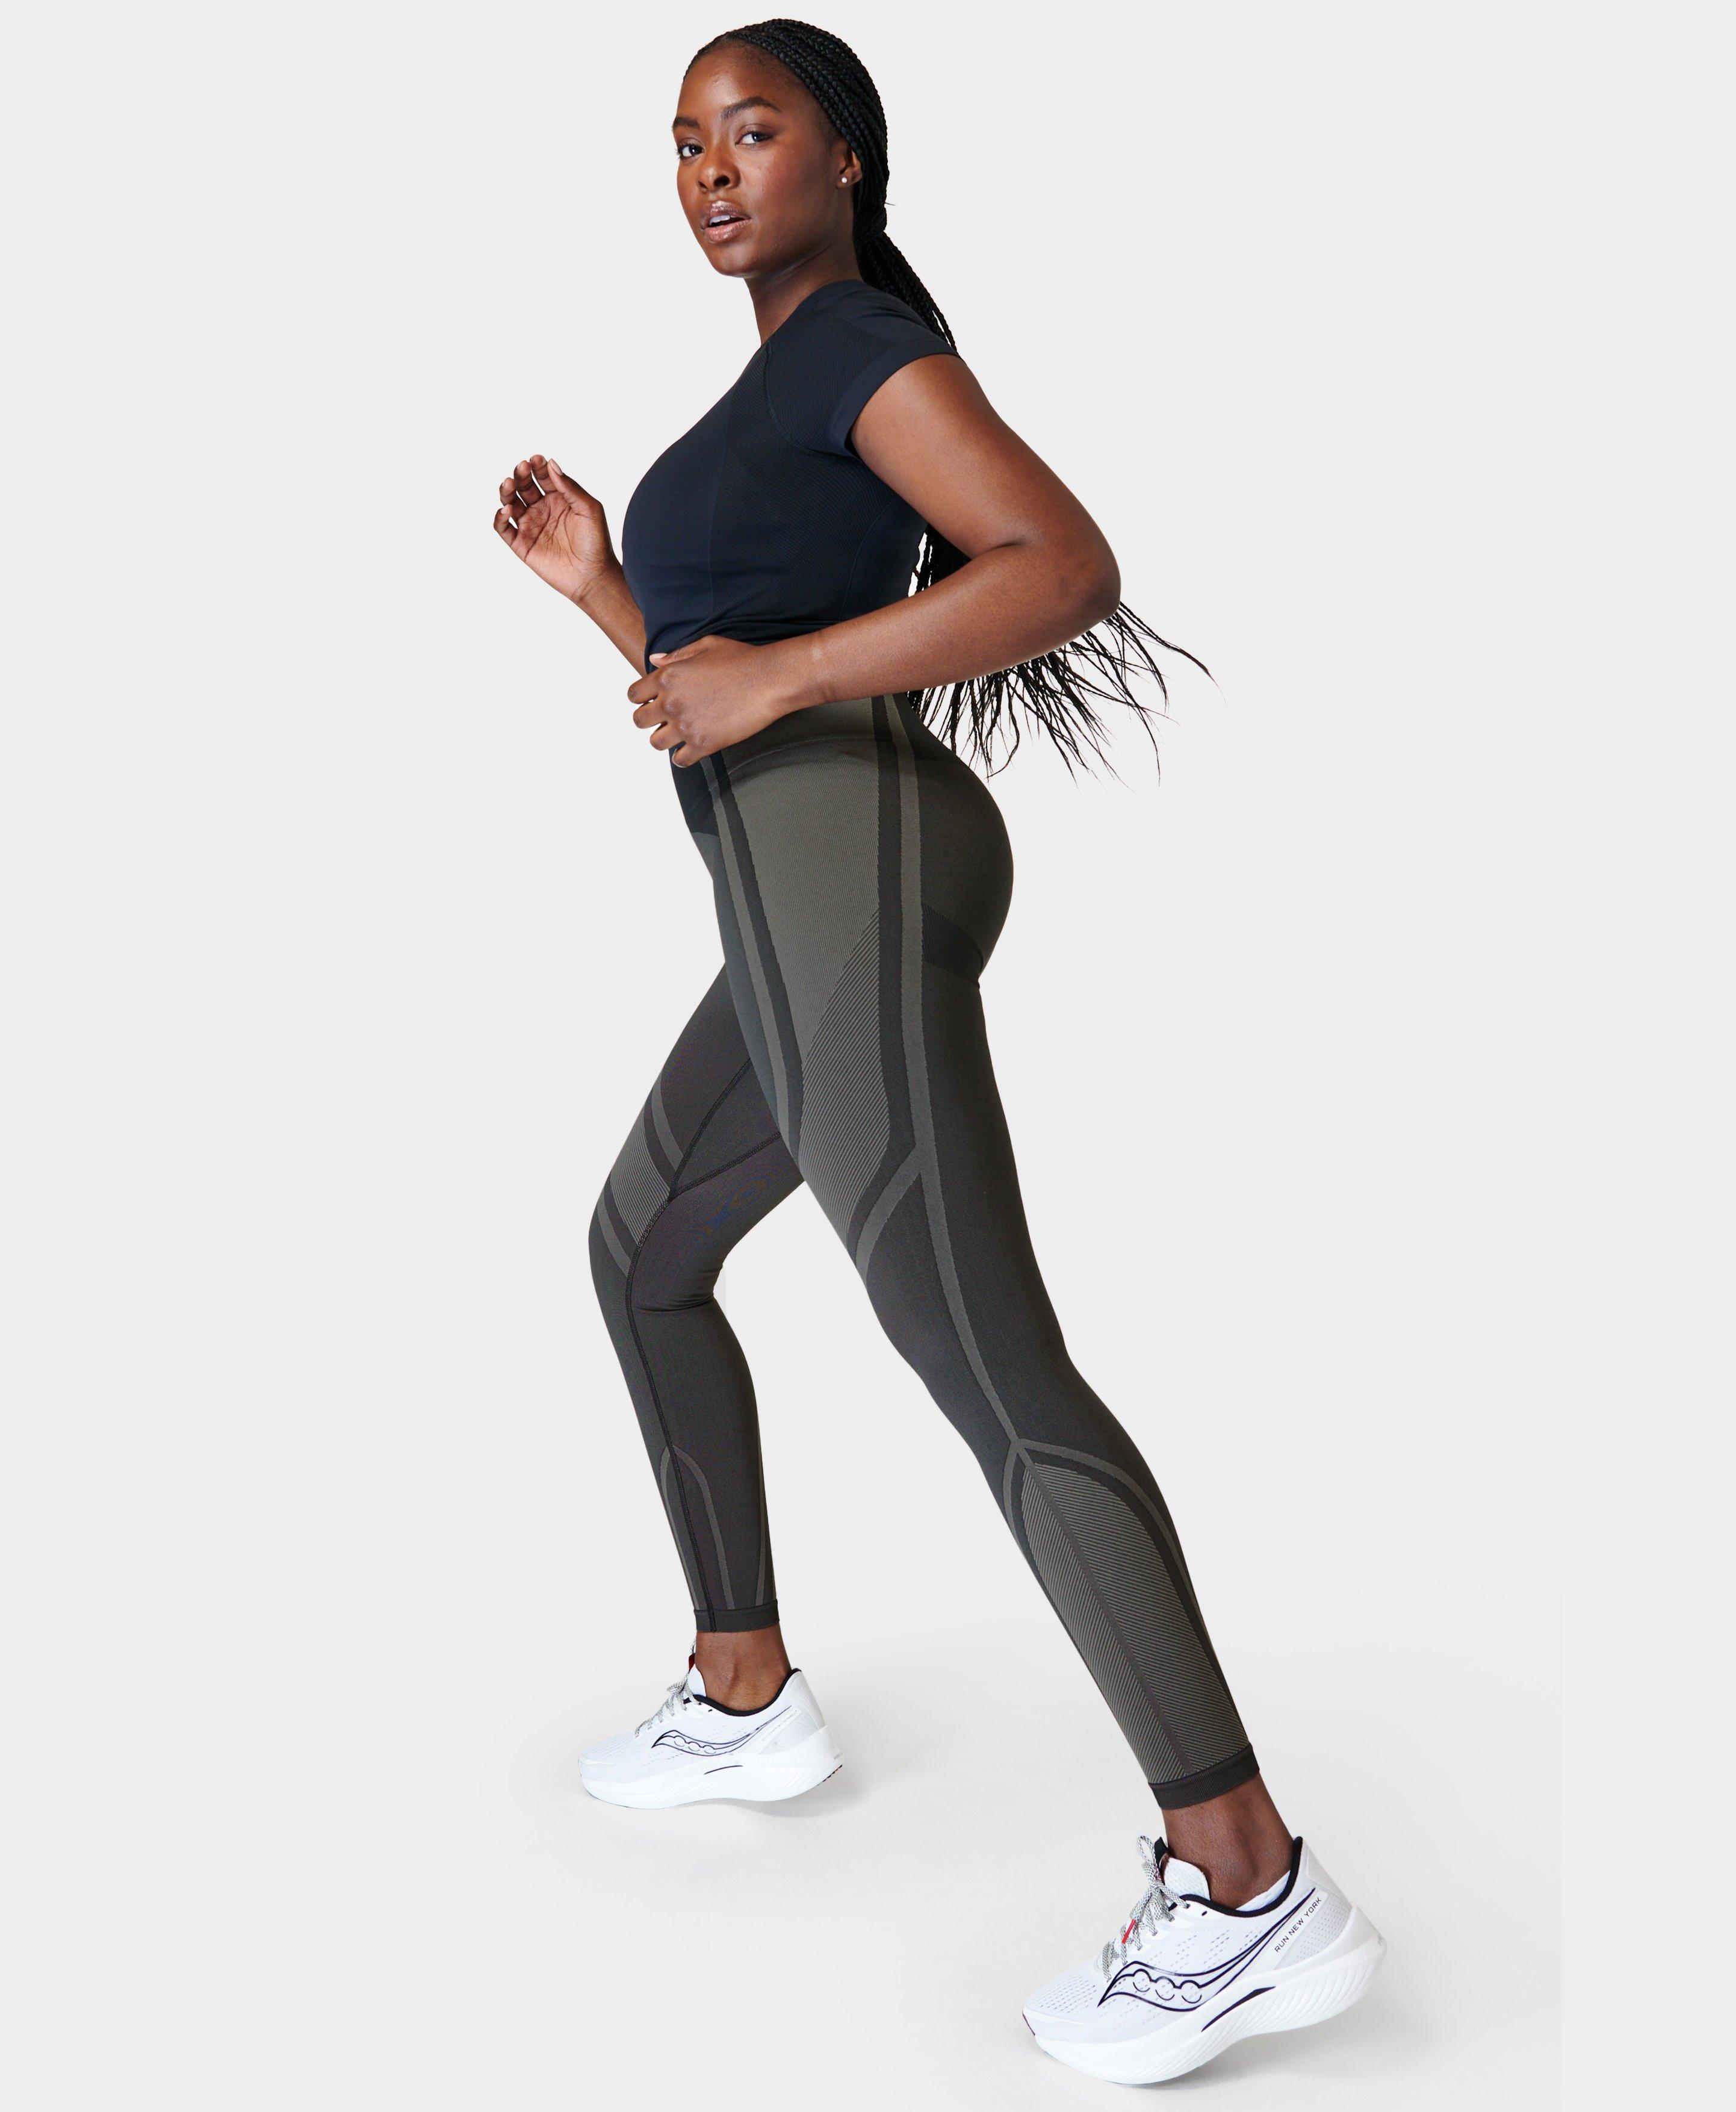 Sweaty Betty Sale - Save Up to 60% Off